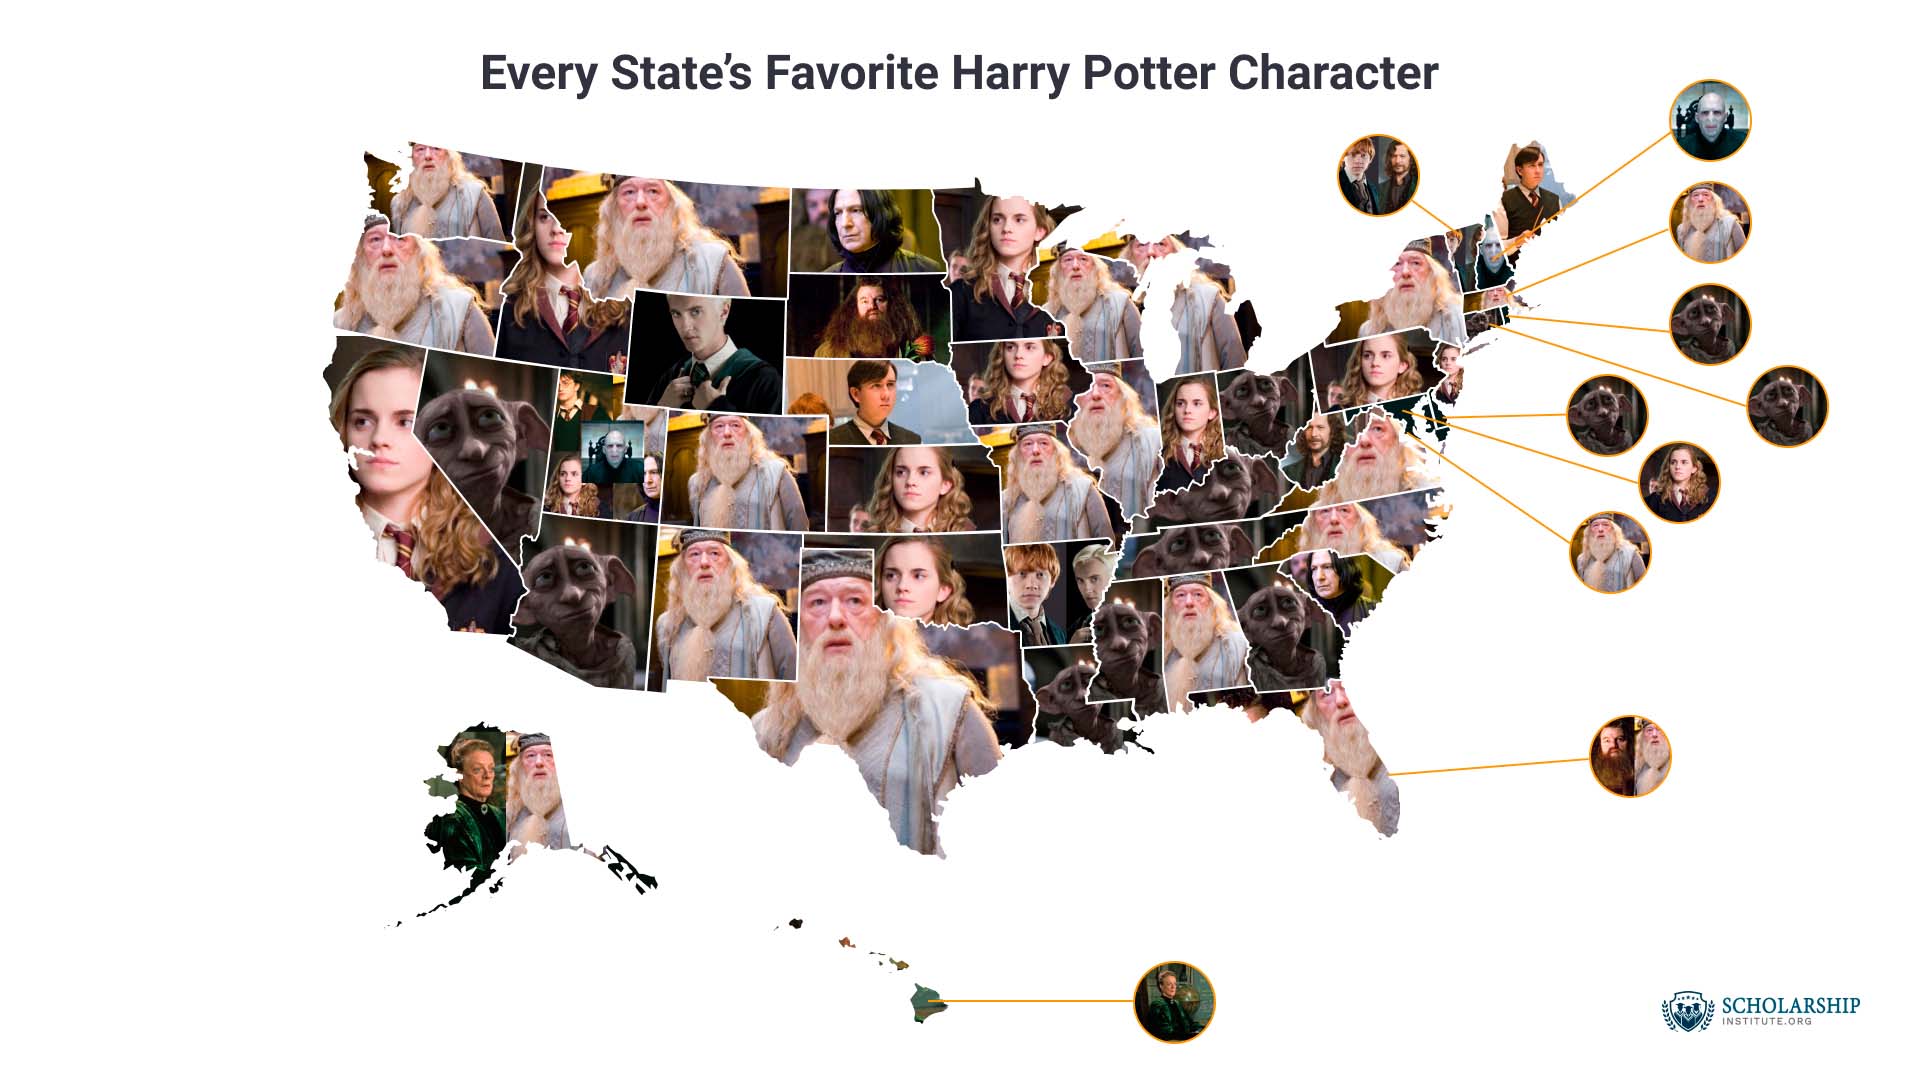 Who is most favorite Harry Potter?